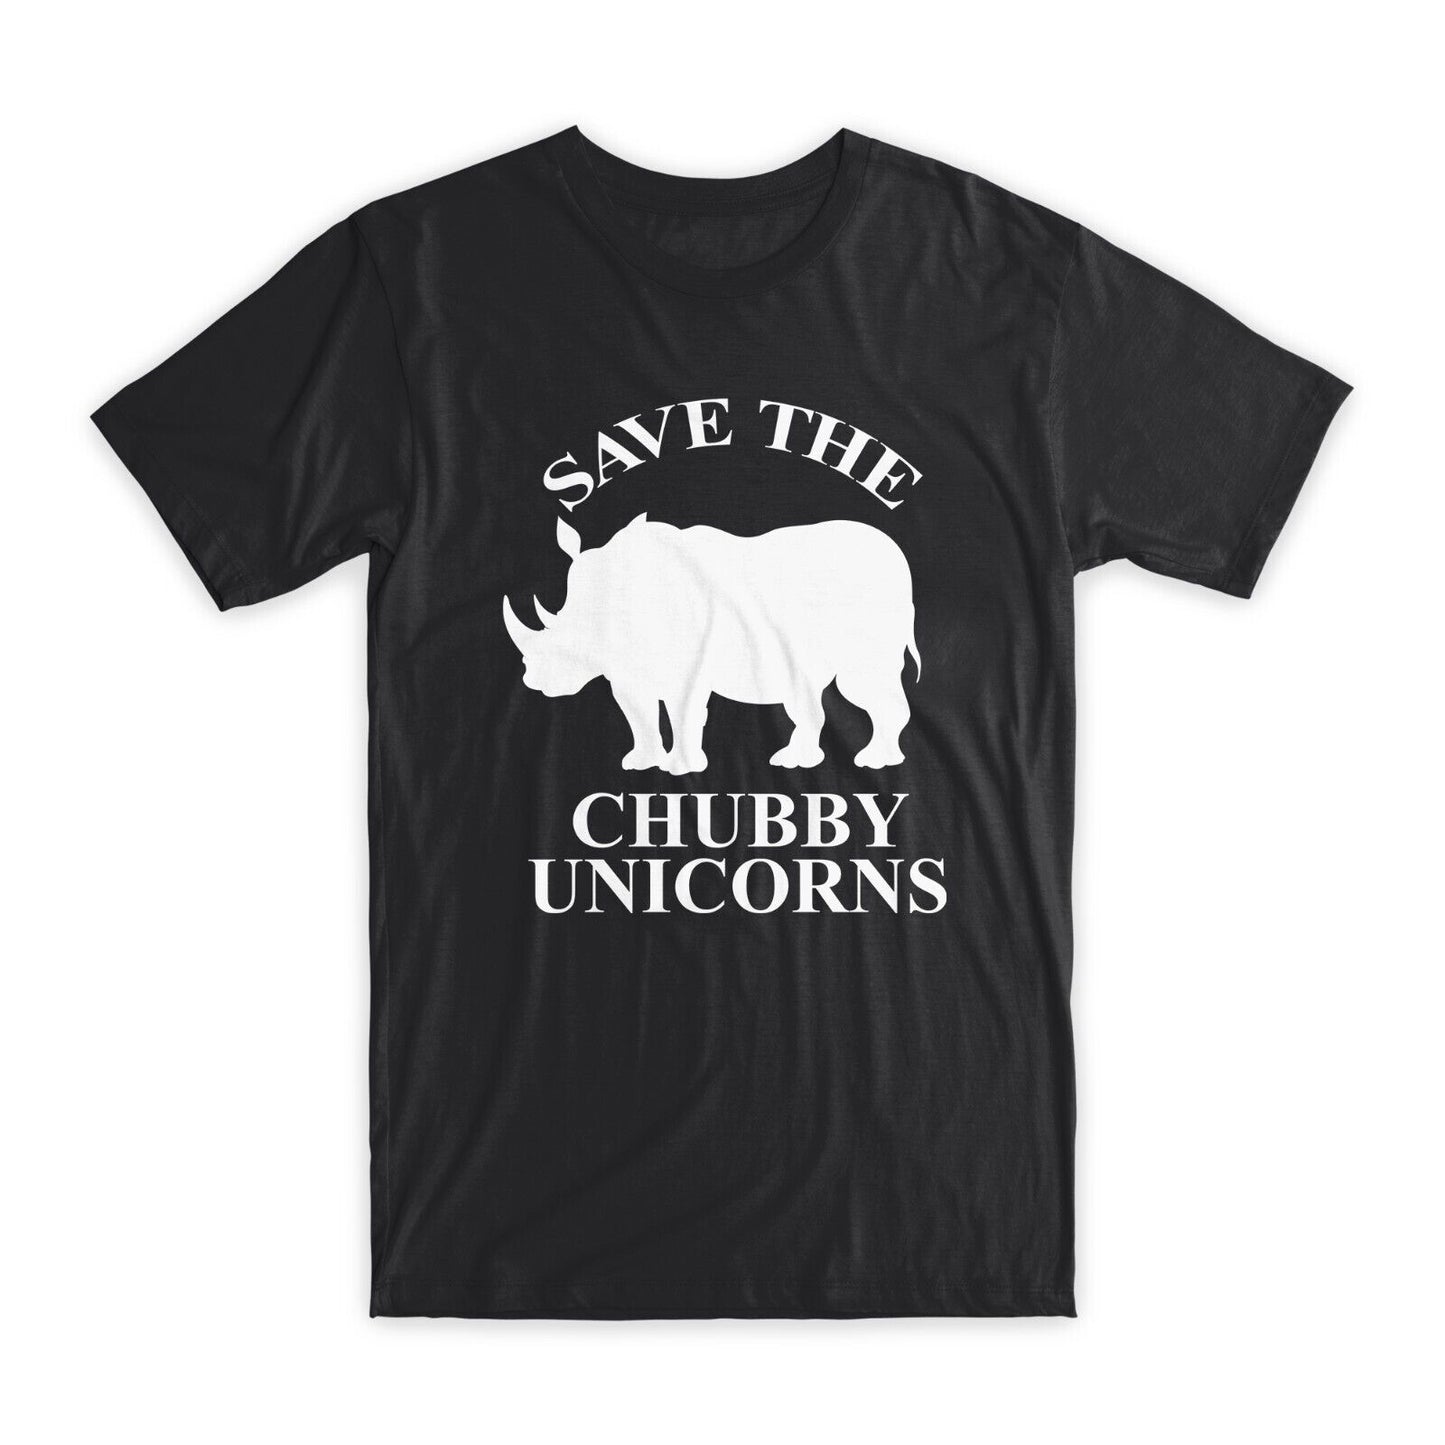 Save The Chubby Unicorns T-Shirt Premium Soft Cotton Funny Tees Novelty Gift NEW